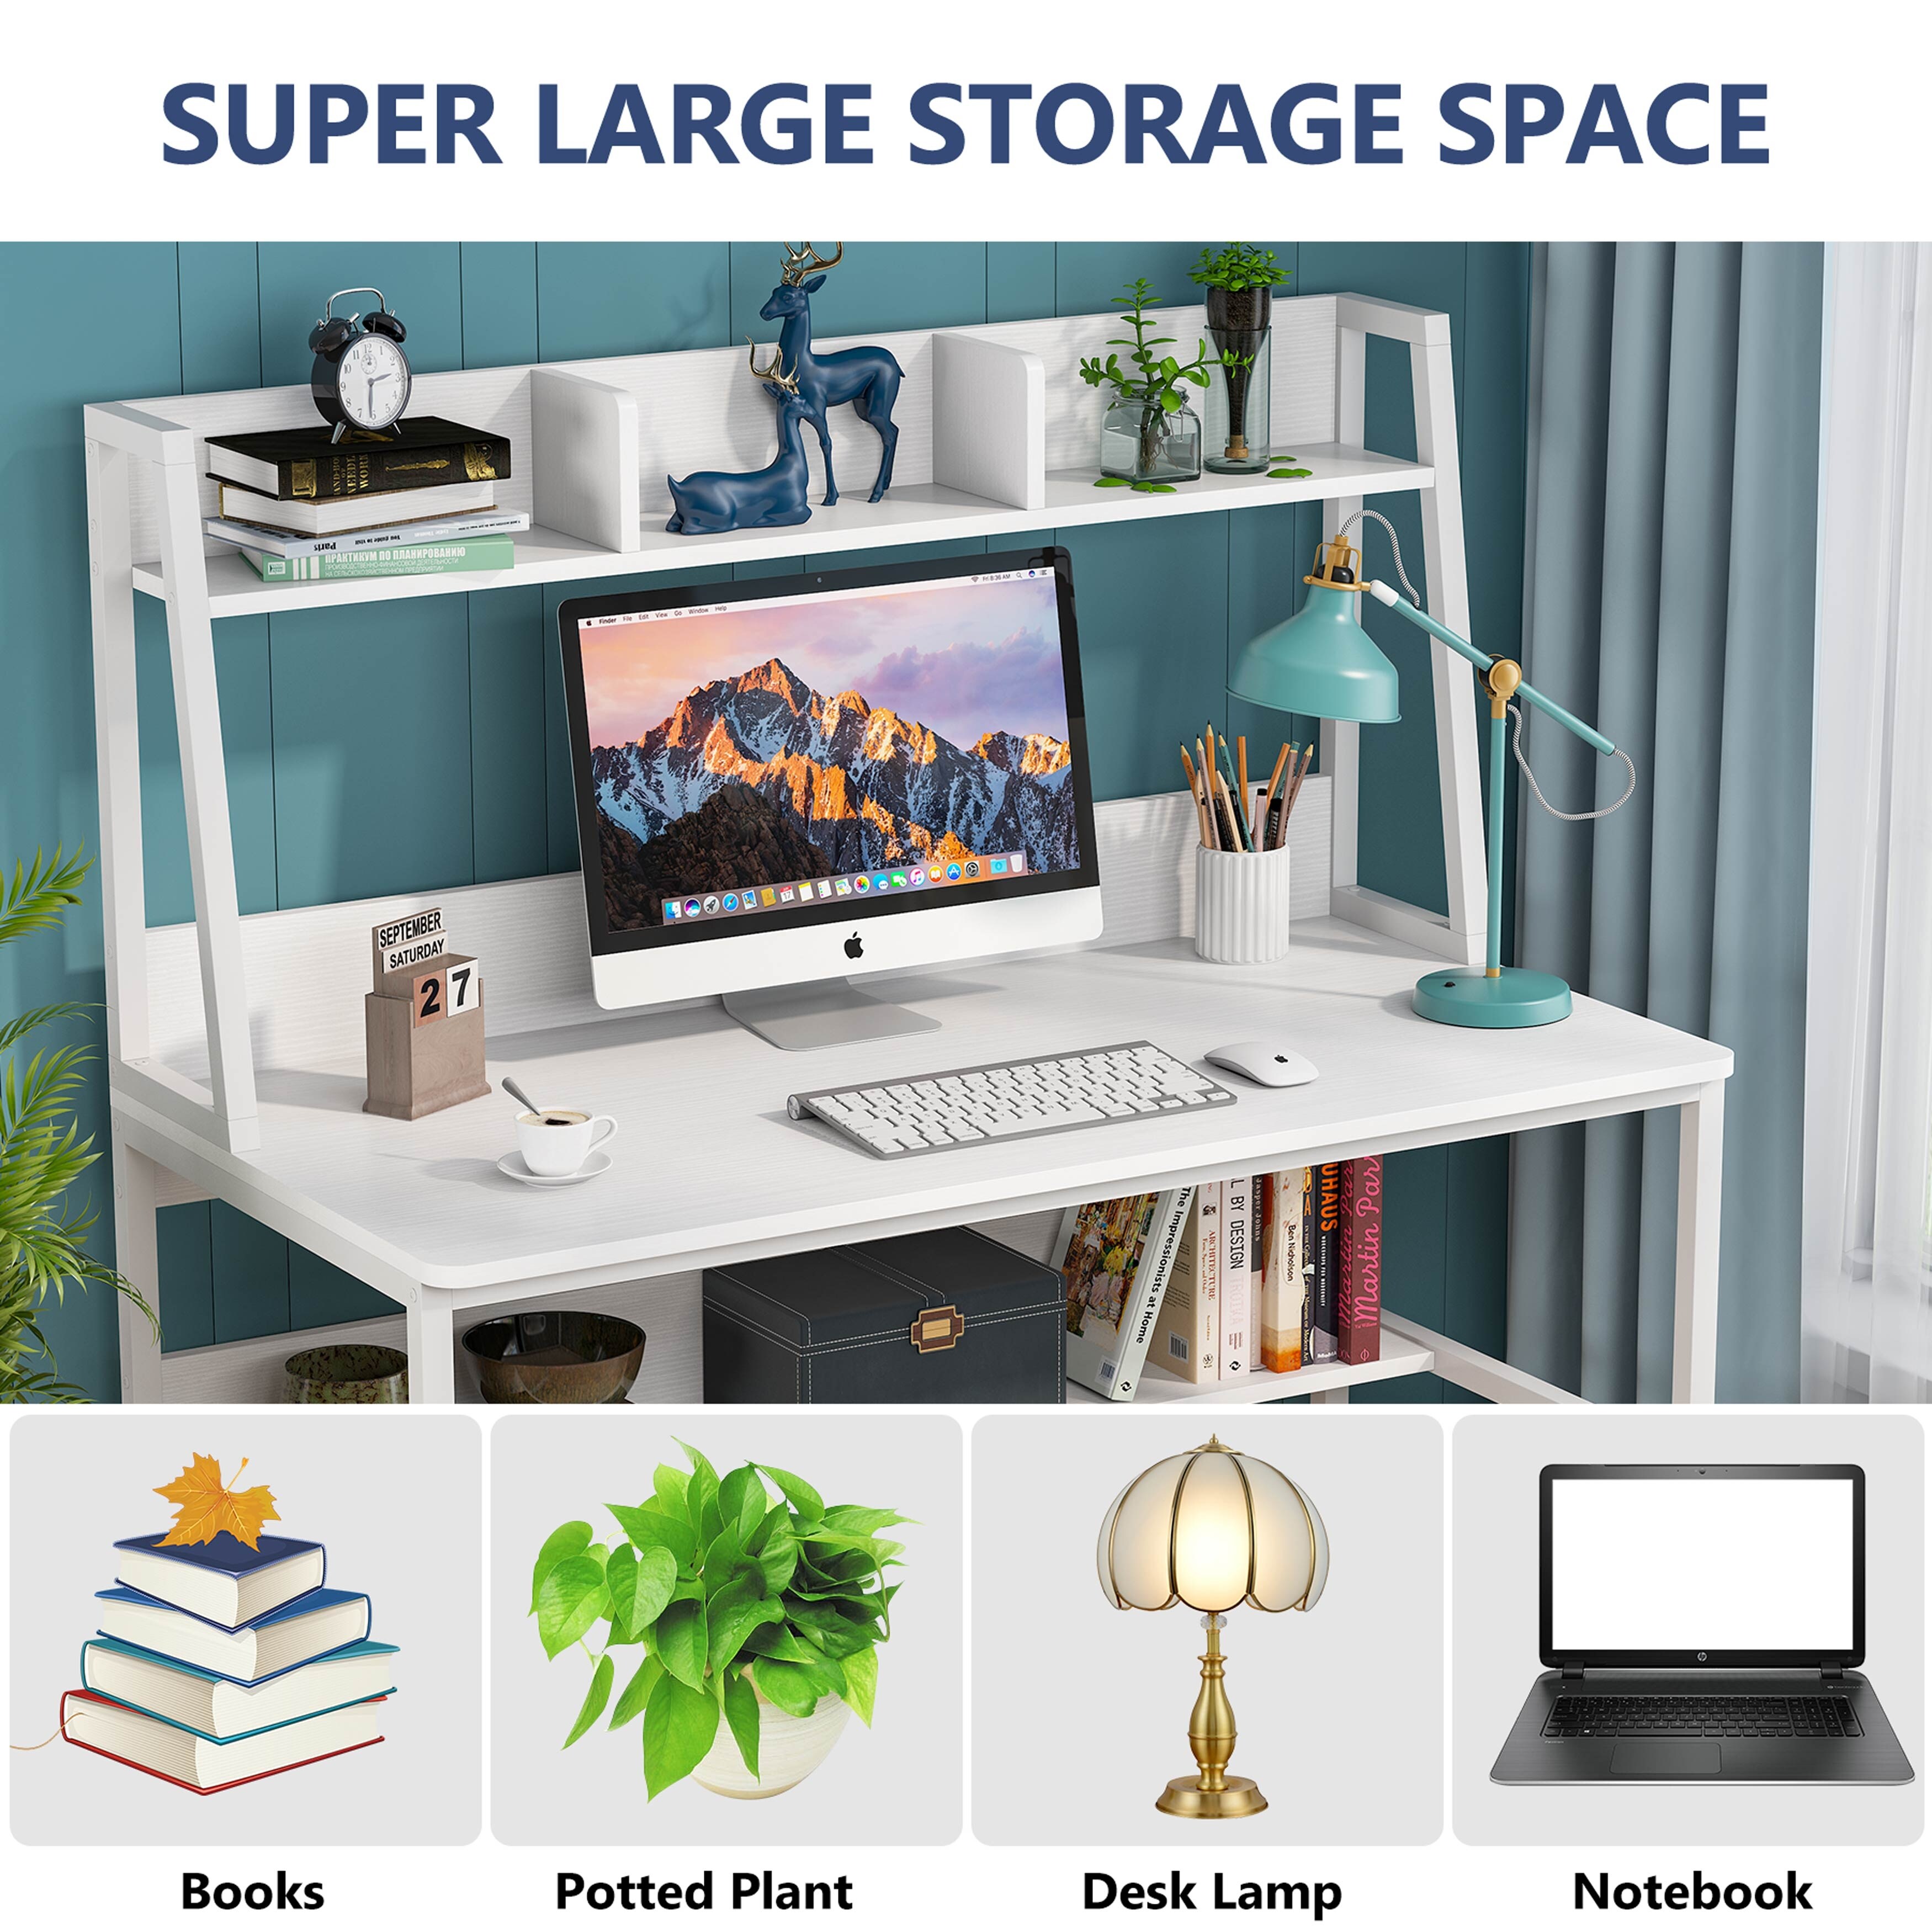 47 Inches White Computer Desk with Hutch, Home Office Desks with 2 Drawers  Storage - Bed Bath & Beyond - 33322682